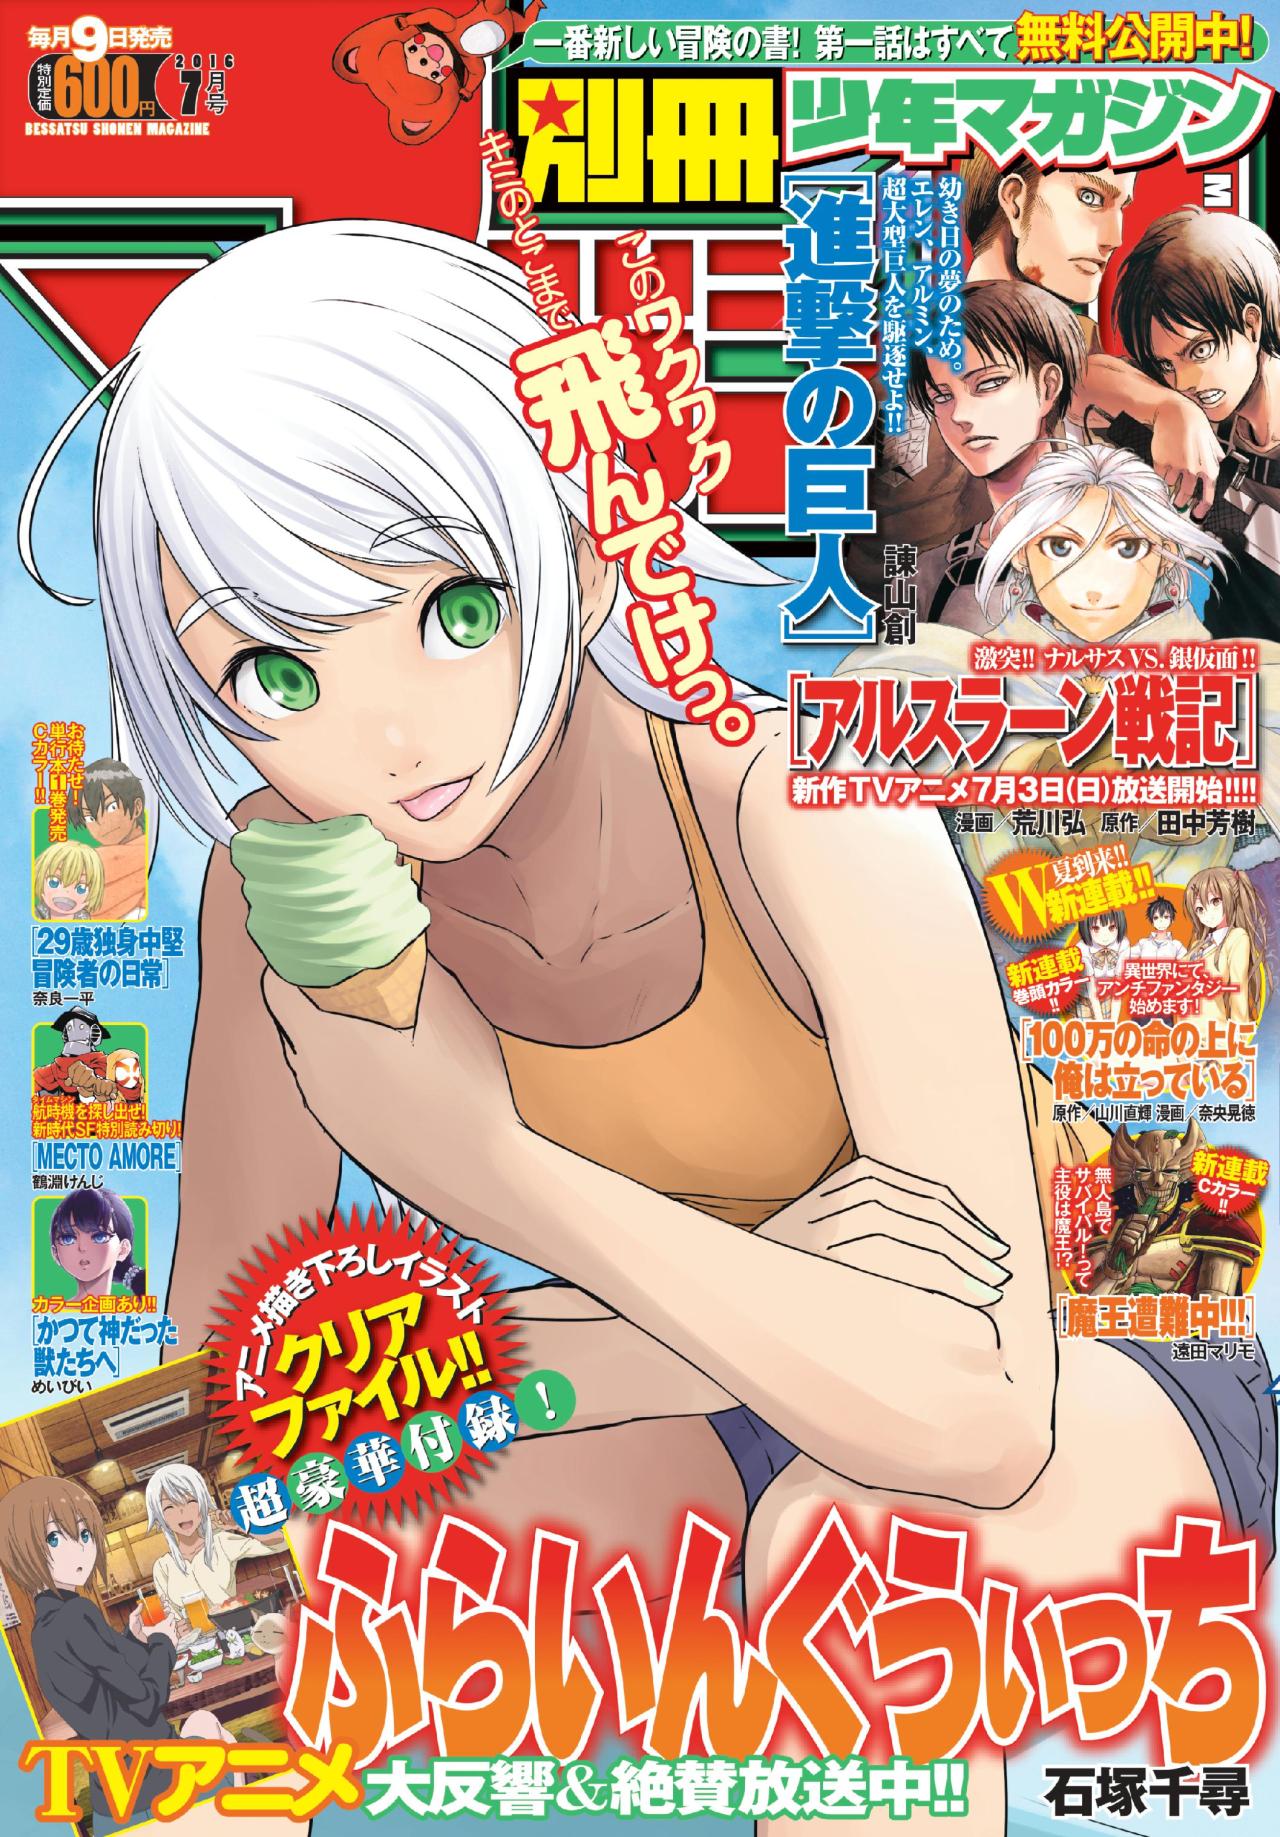 The cover of Bessatsu Shonen’s July 2016 issue, featuring Flying Witcch on the